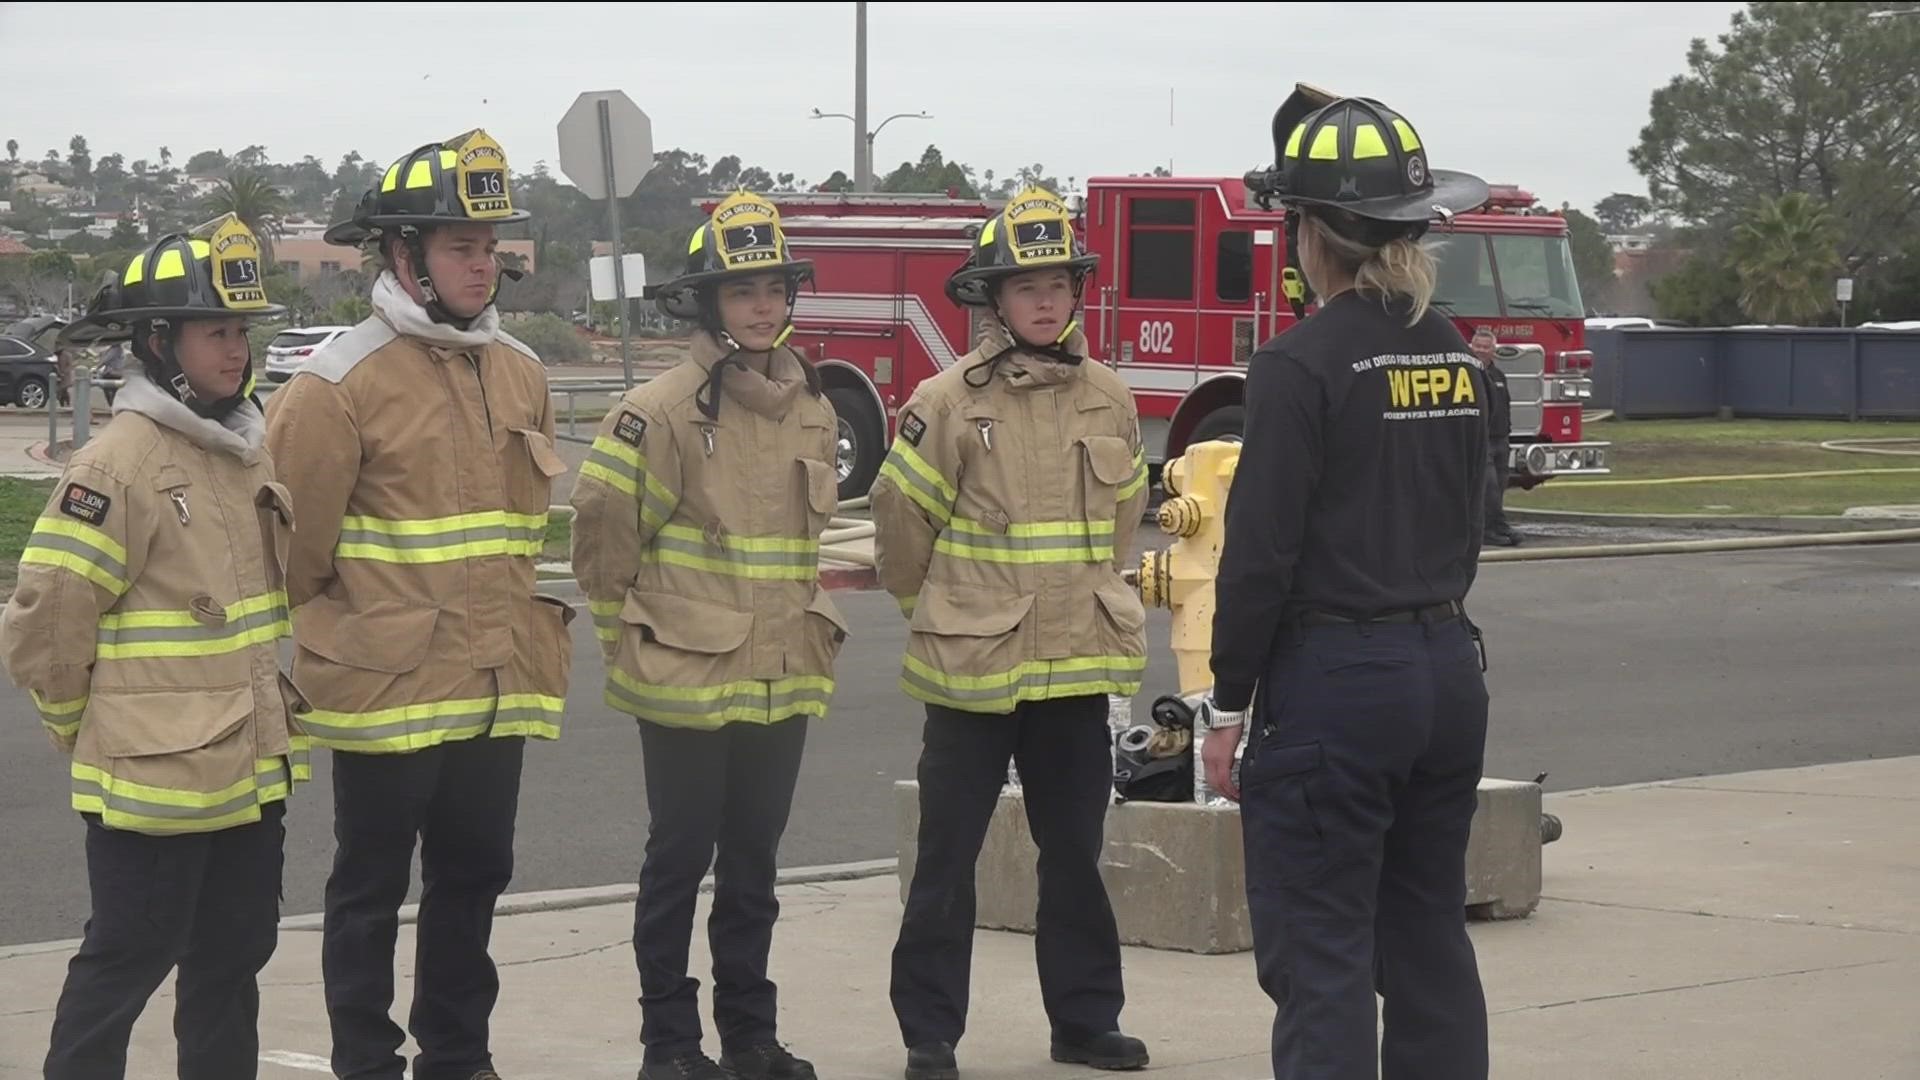 Dozens of women and two men participated in the grueling training that prepared them for the fire academy.